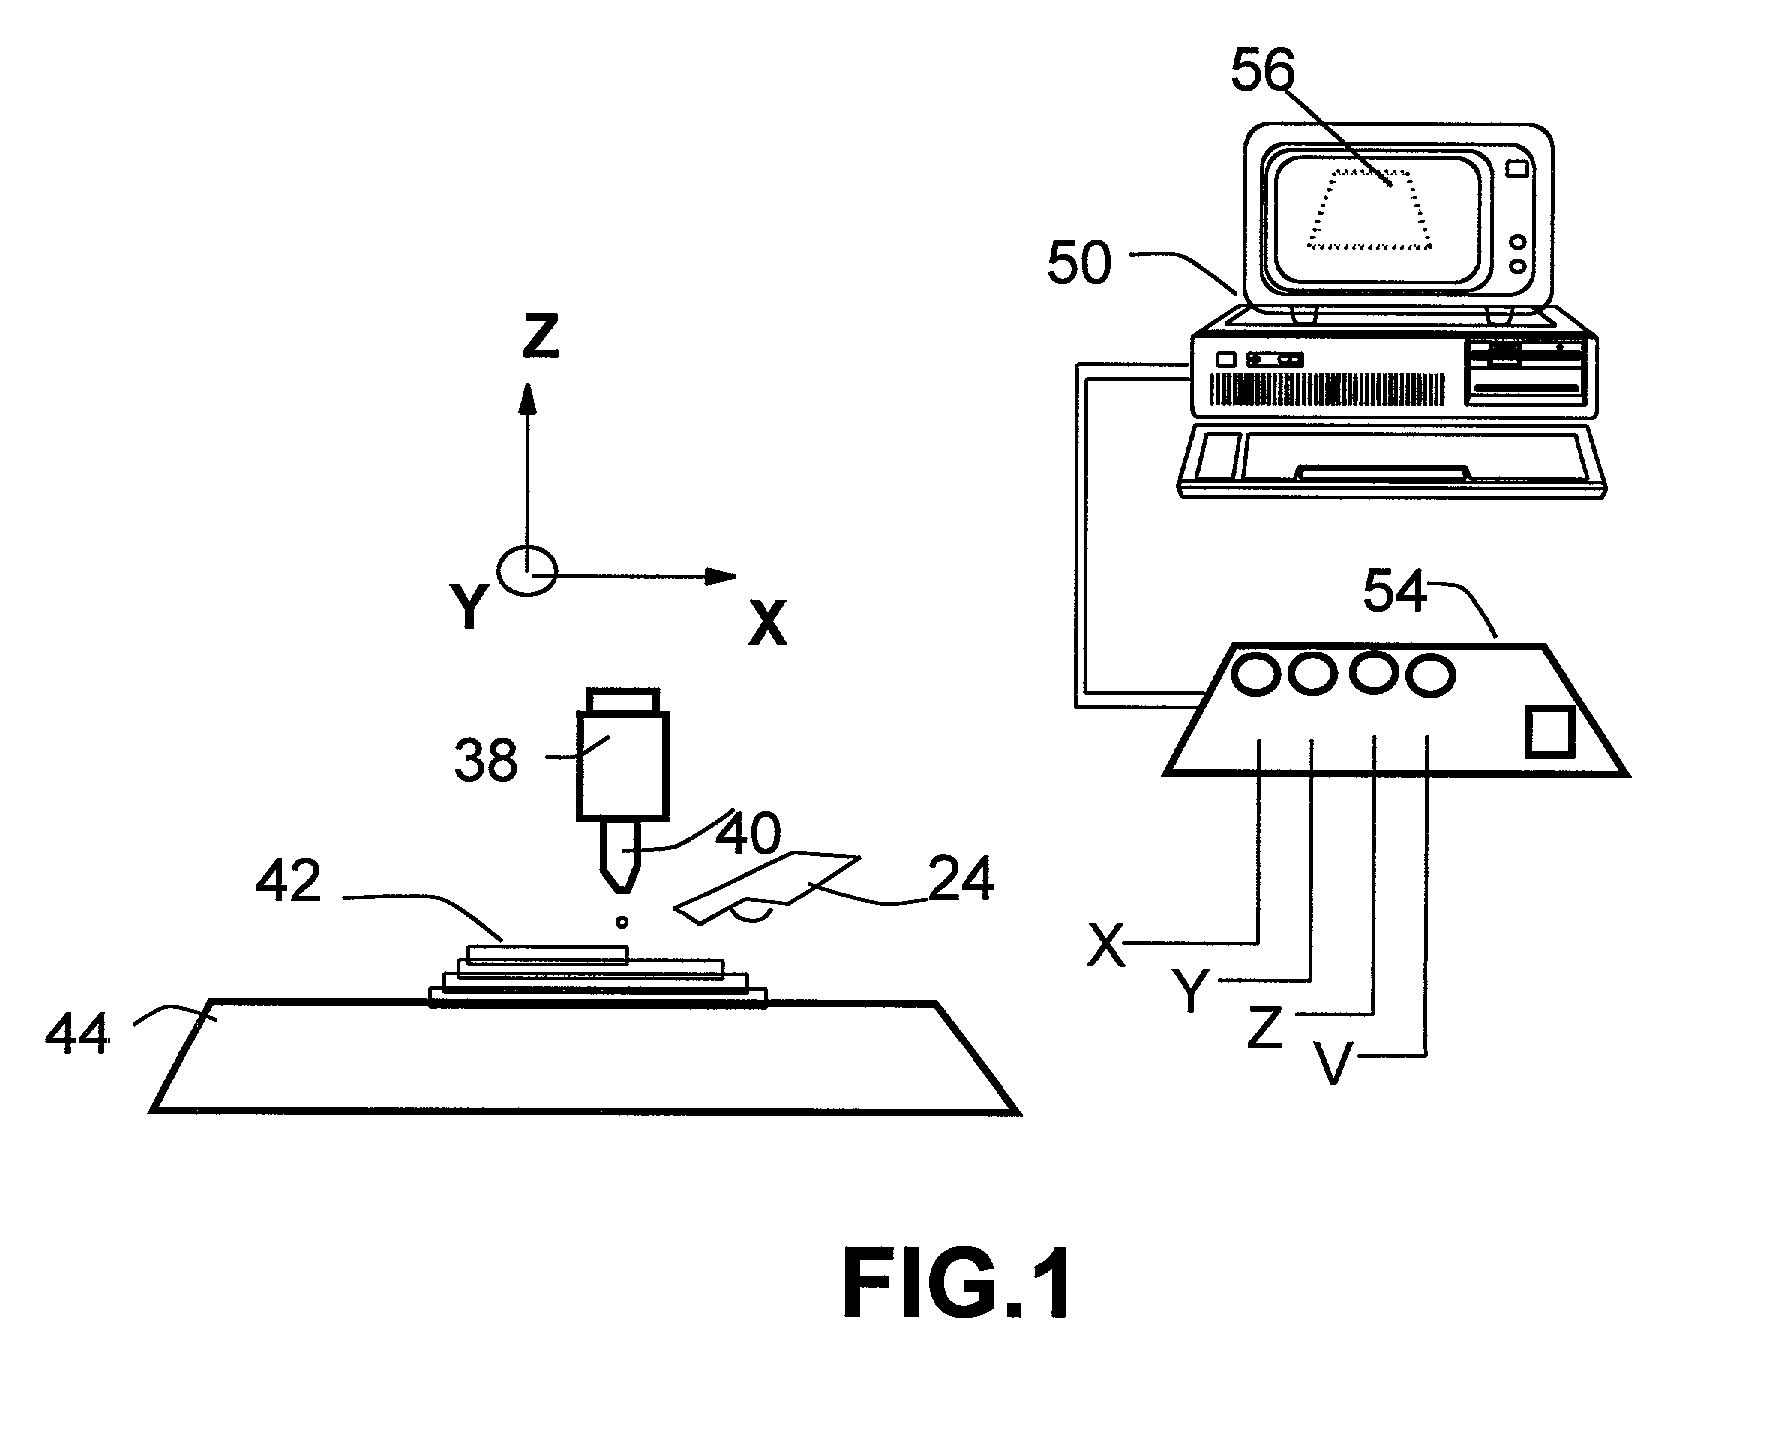 Droplet deposition method for rapid formation of 3-D objects from non-cross-linking reactive polymers